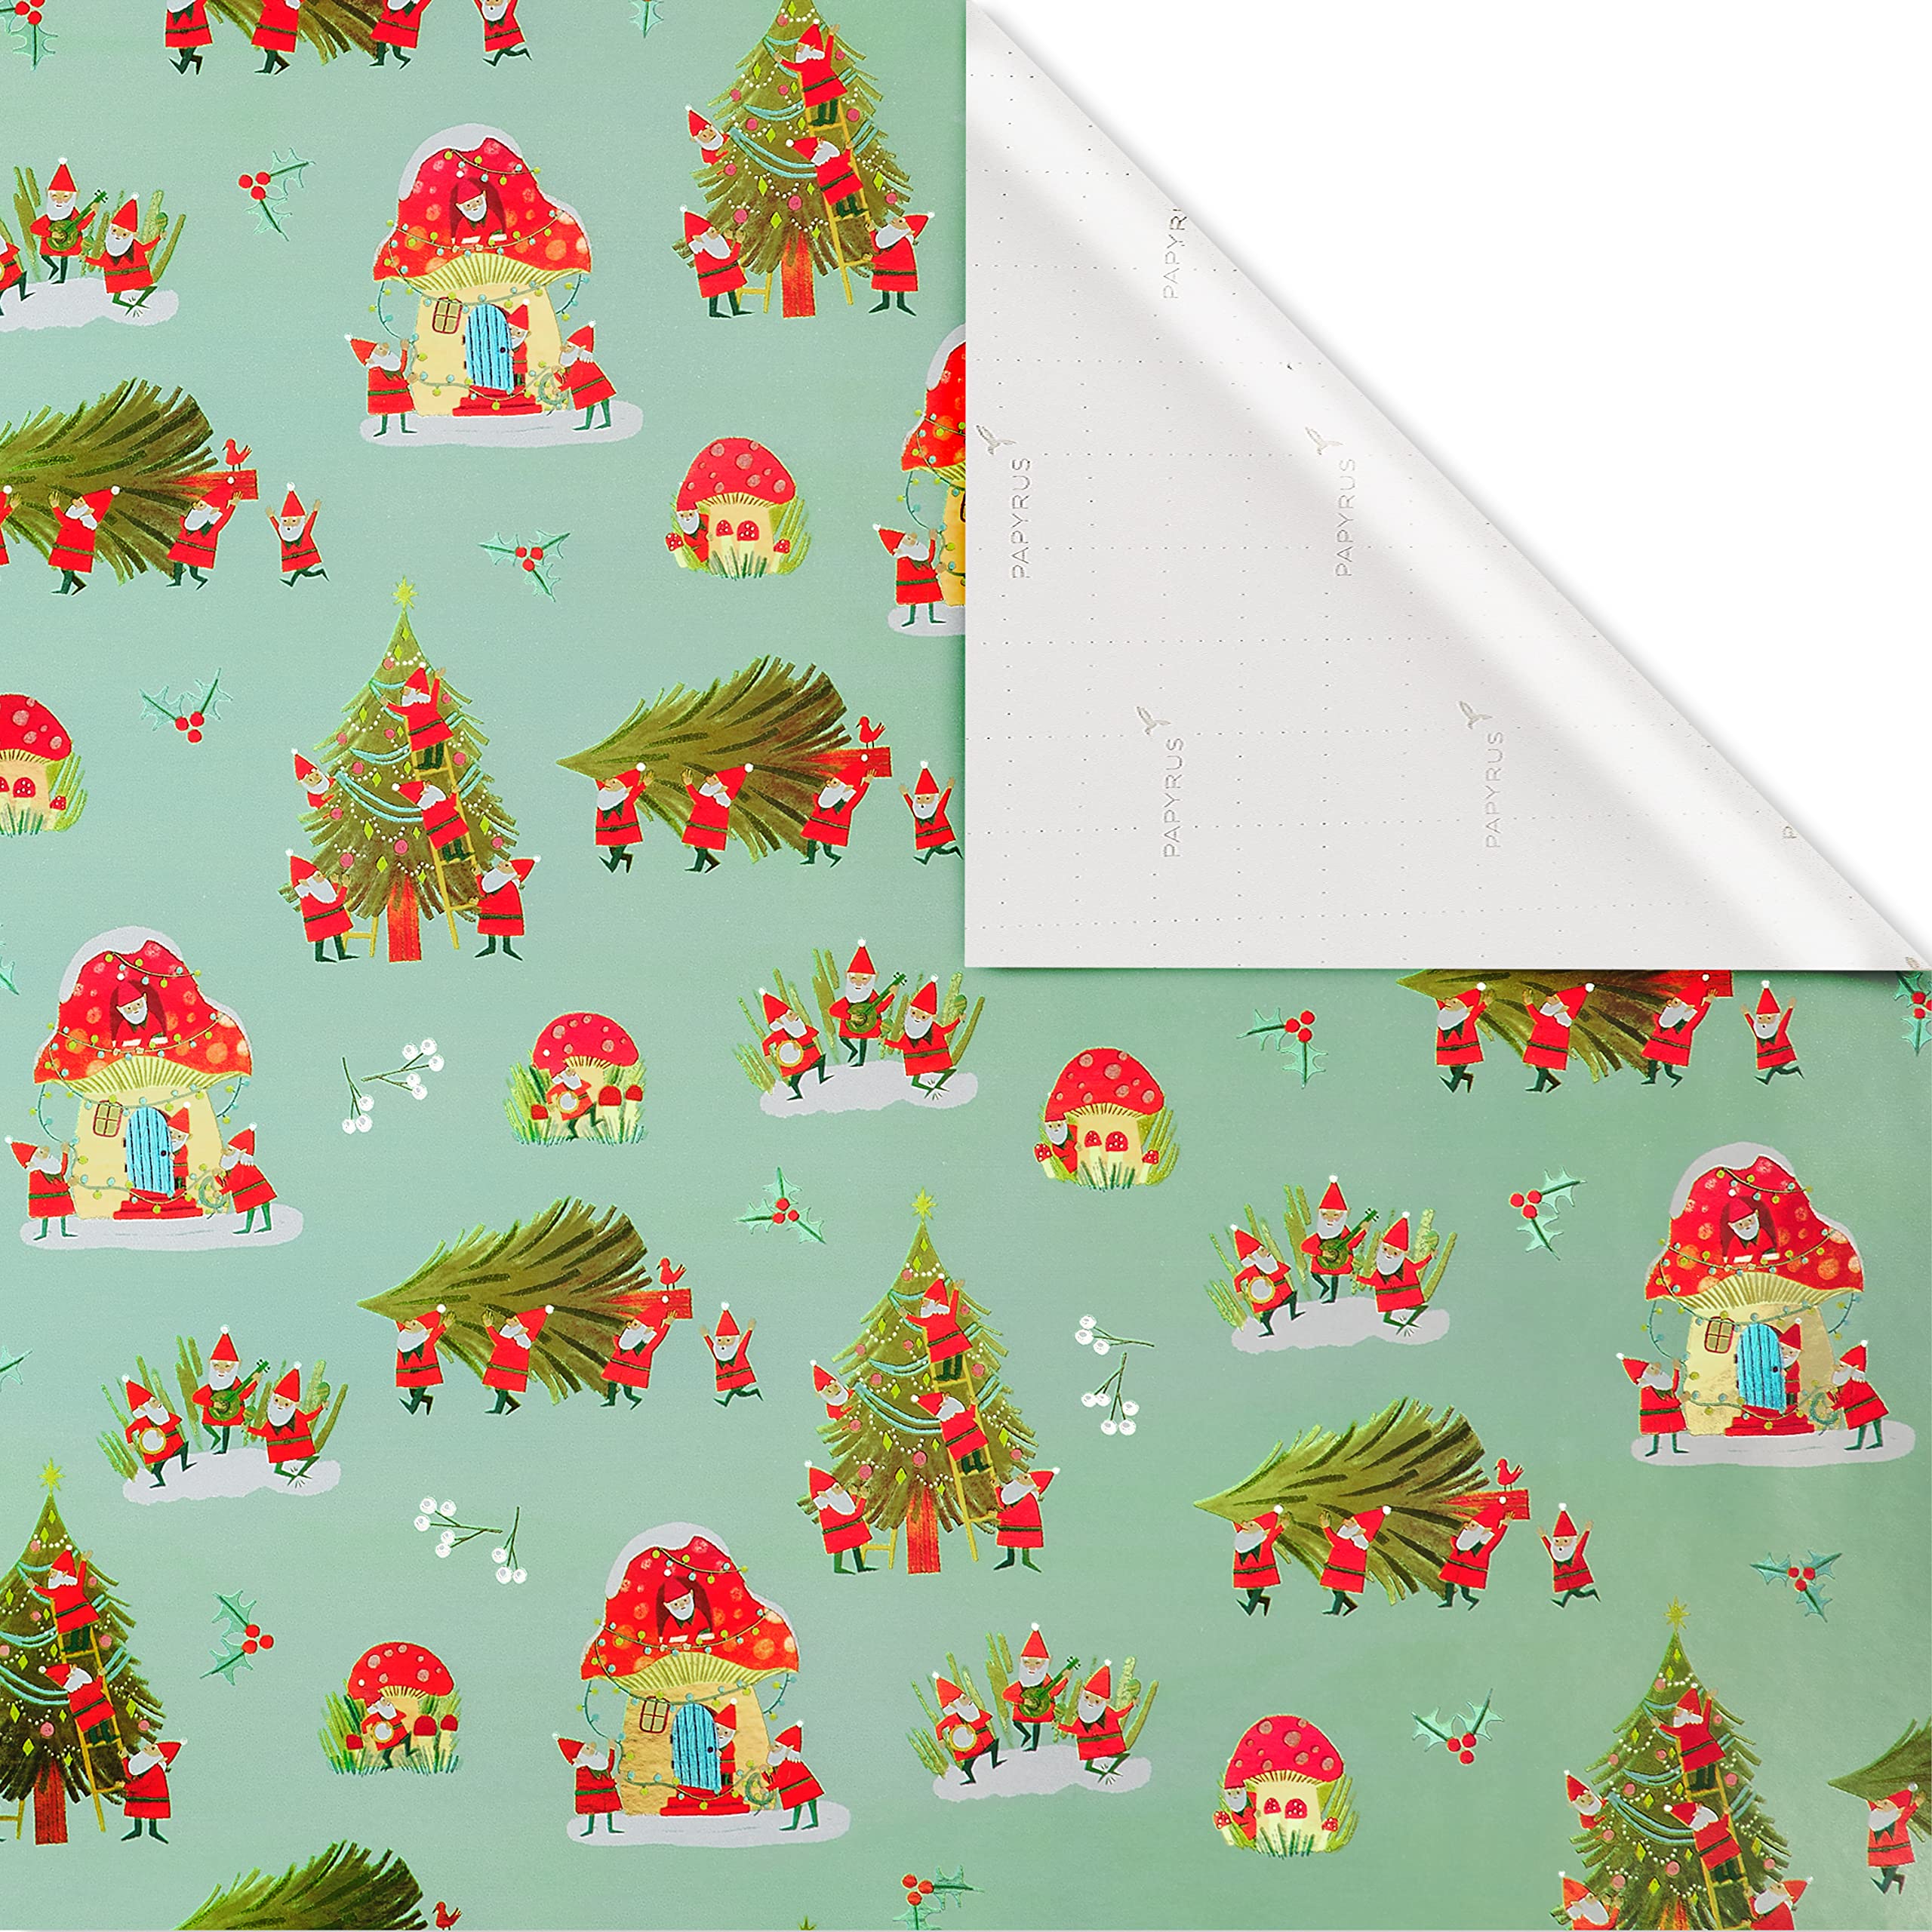 Papyrus Christmas Wrapping Paper Bundle, Gnomes and Santa Train (2 Rolls, 52.5 sq. ft)